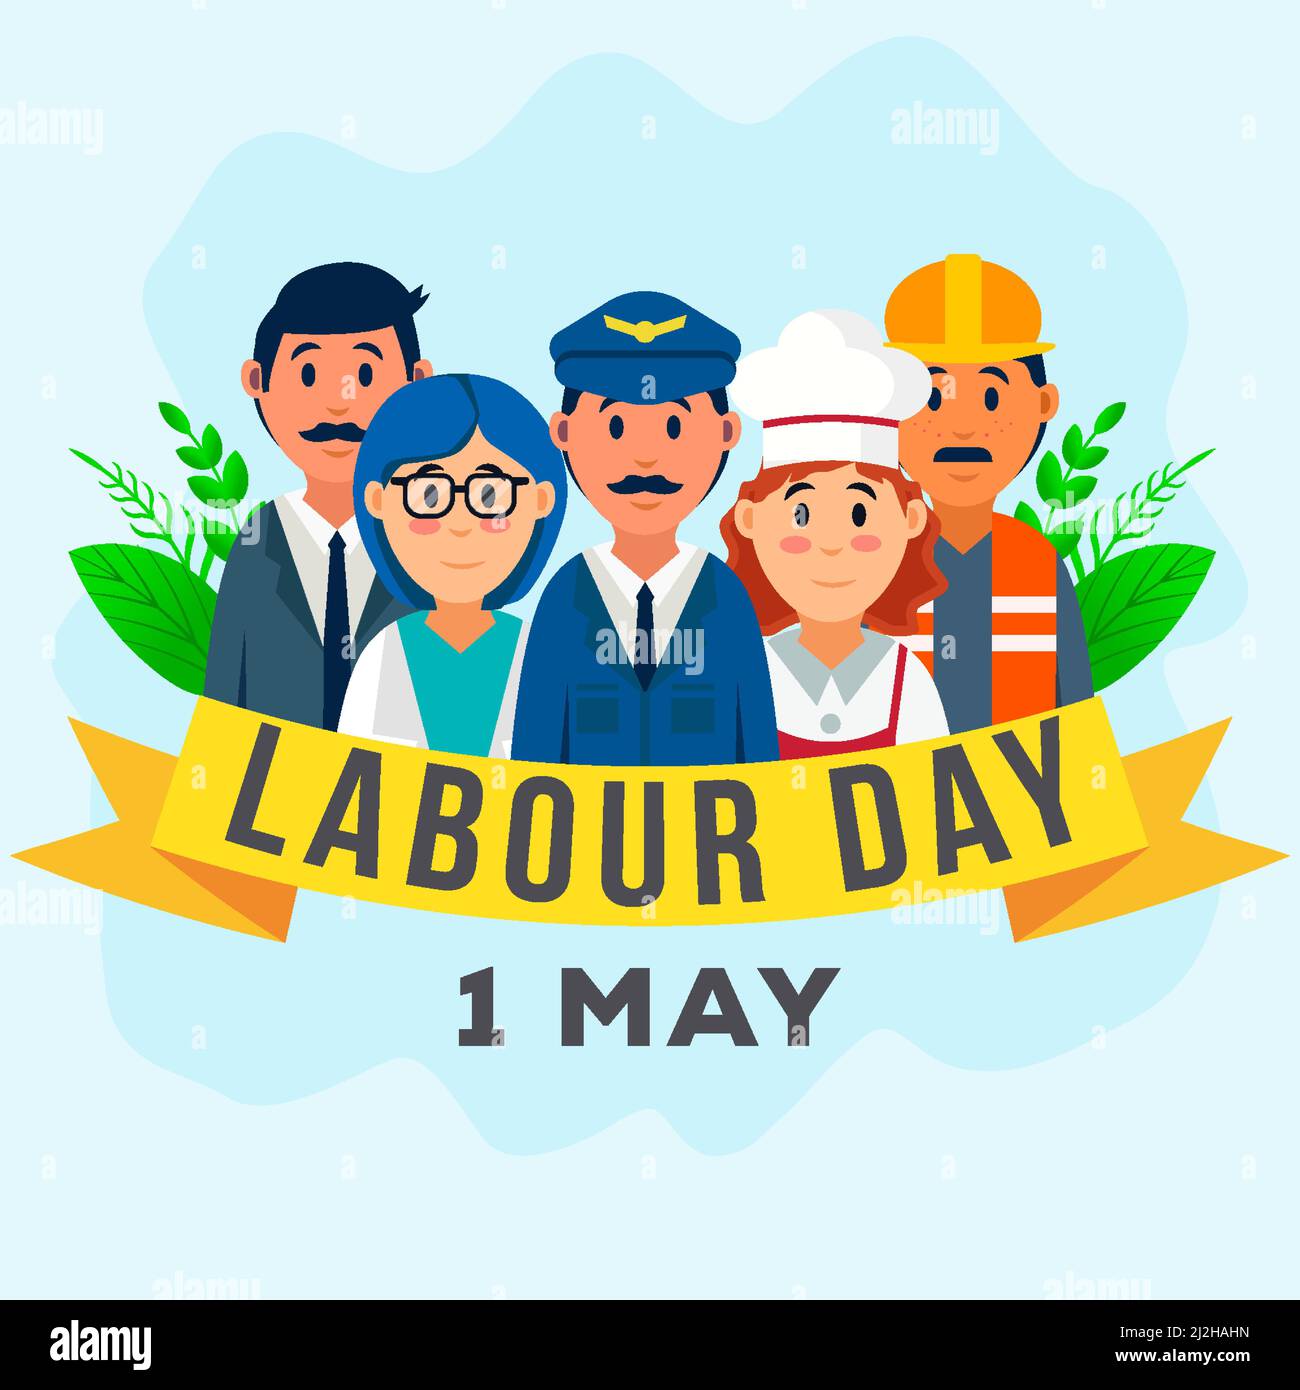 labour day on 1 may illustration design with A Group Of People Of Different Professions Stock Vector